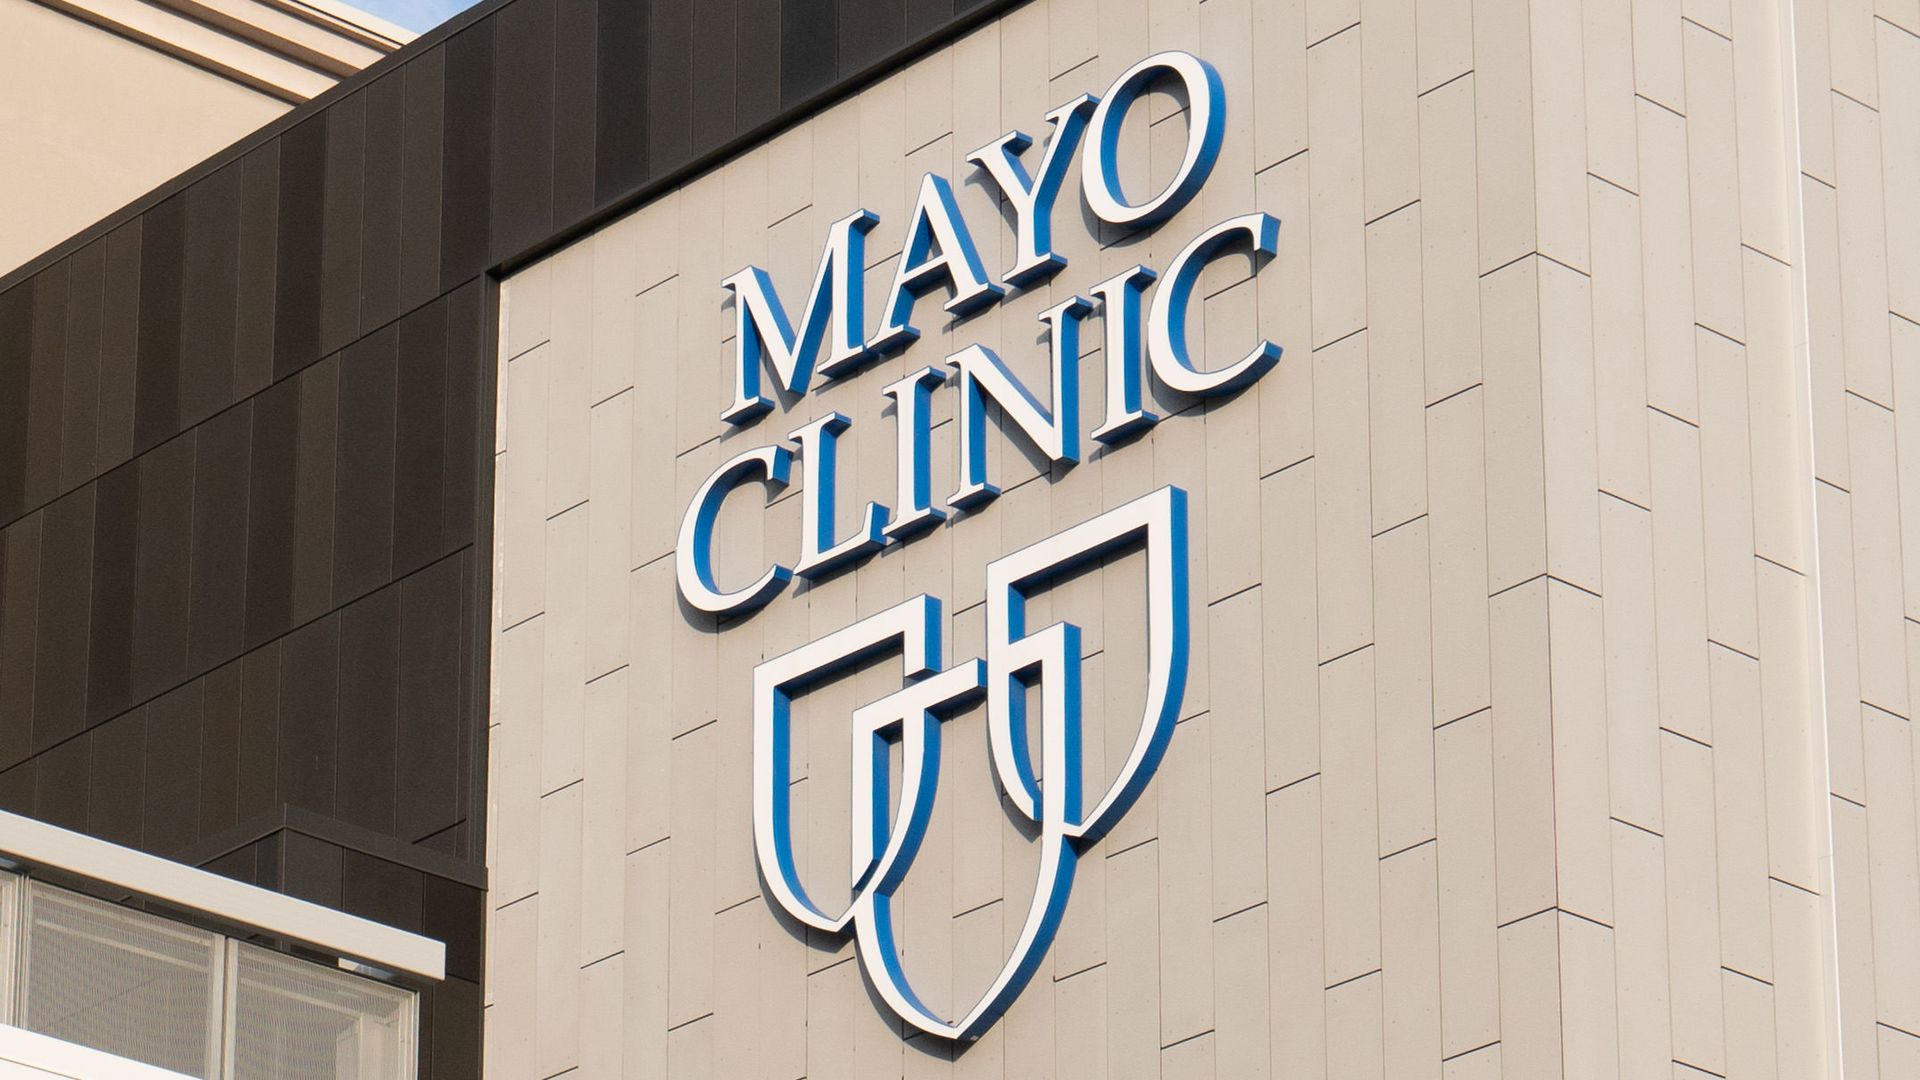 An exterior shot of a Mayo Clinic building showing their logo.